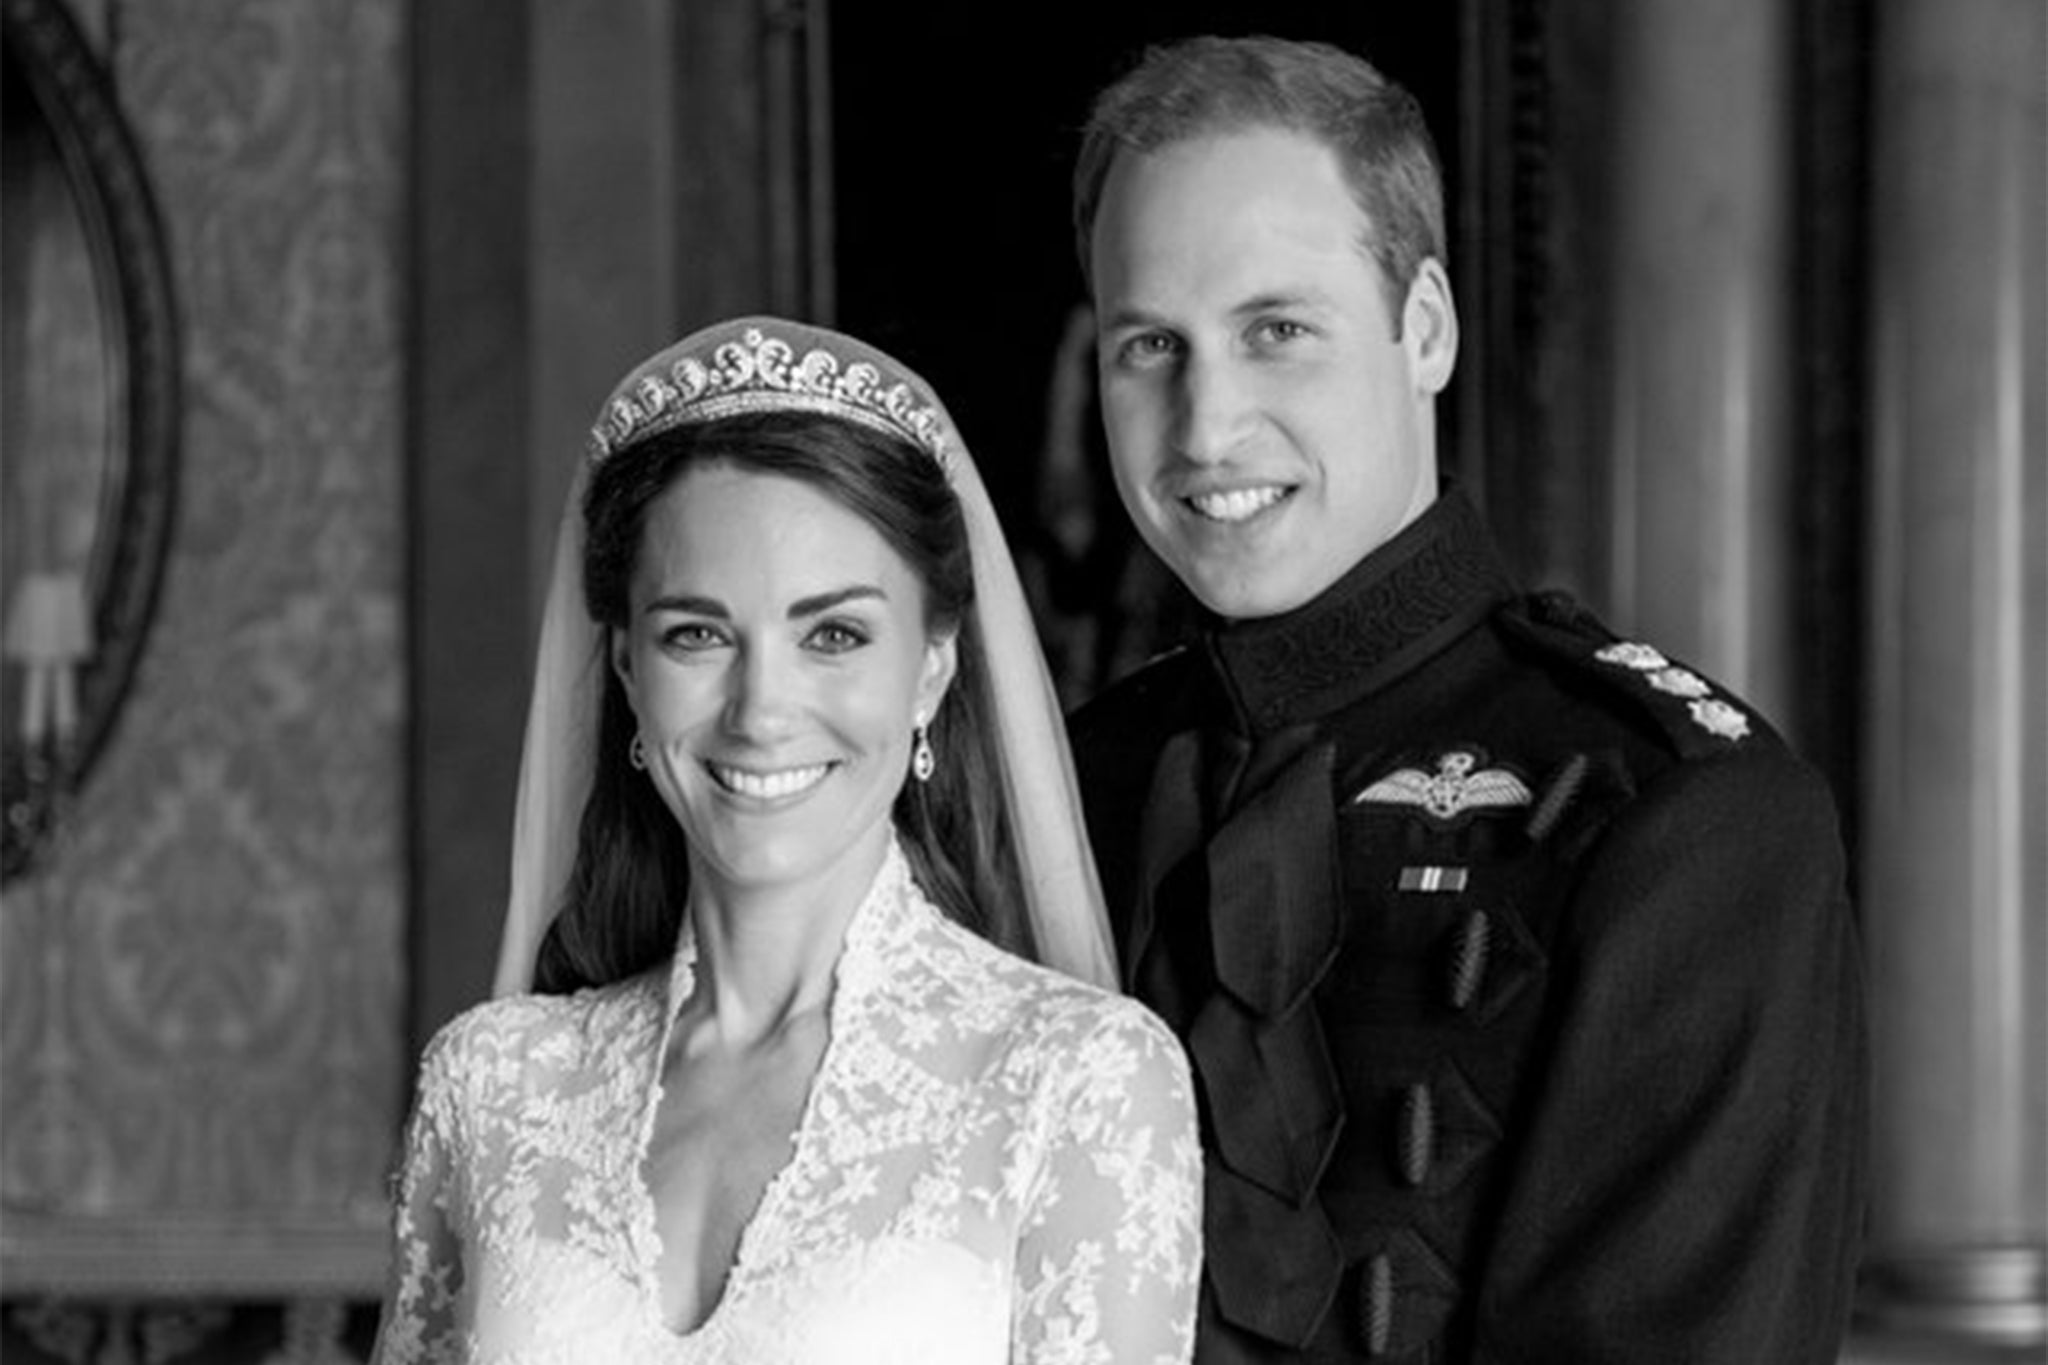 A previously unseen portrait of the Prince and Princess of Wales was released in celebration of the couple’s 13th wedding anniversary